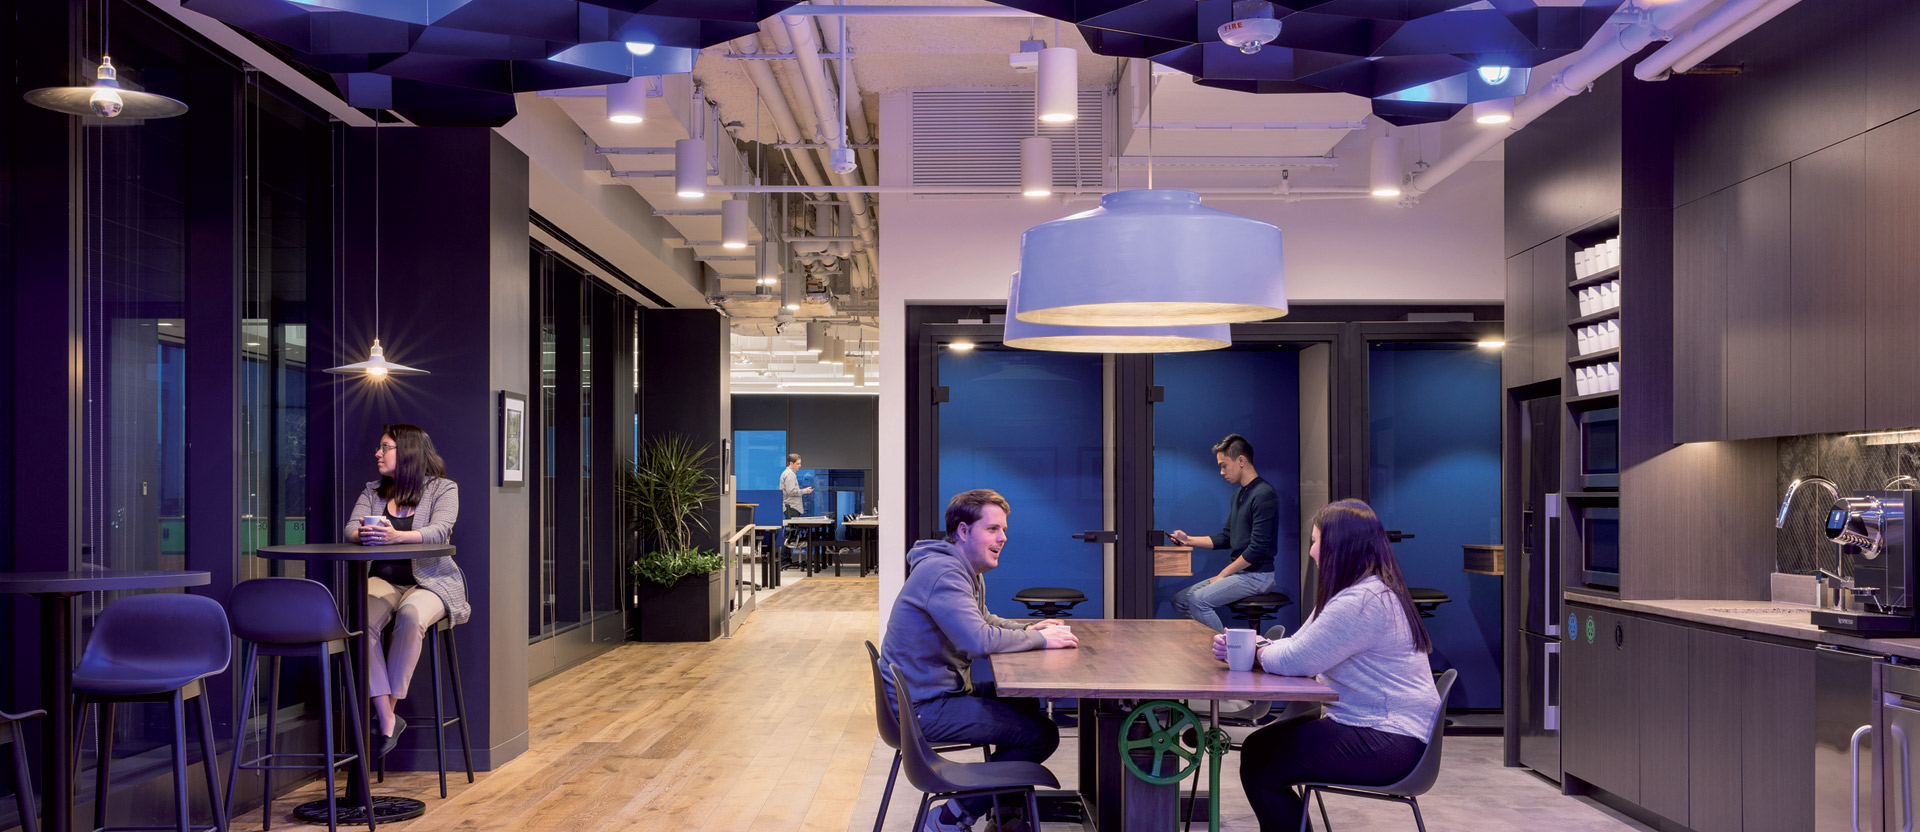 Modern office break room featuring geometric blue acoustic ceiling panels, wooden flooring, and pendant lighting. Colleagues converse at a central table while others work at high-top counters against a kitchenette with dark cabinetry.